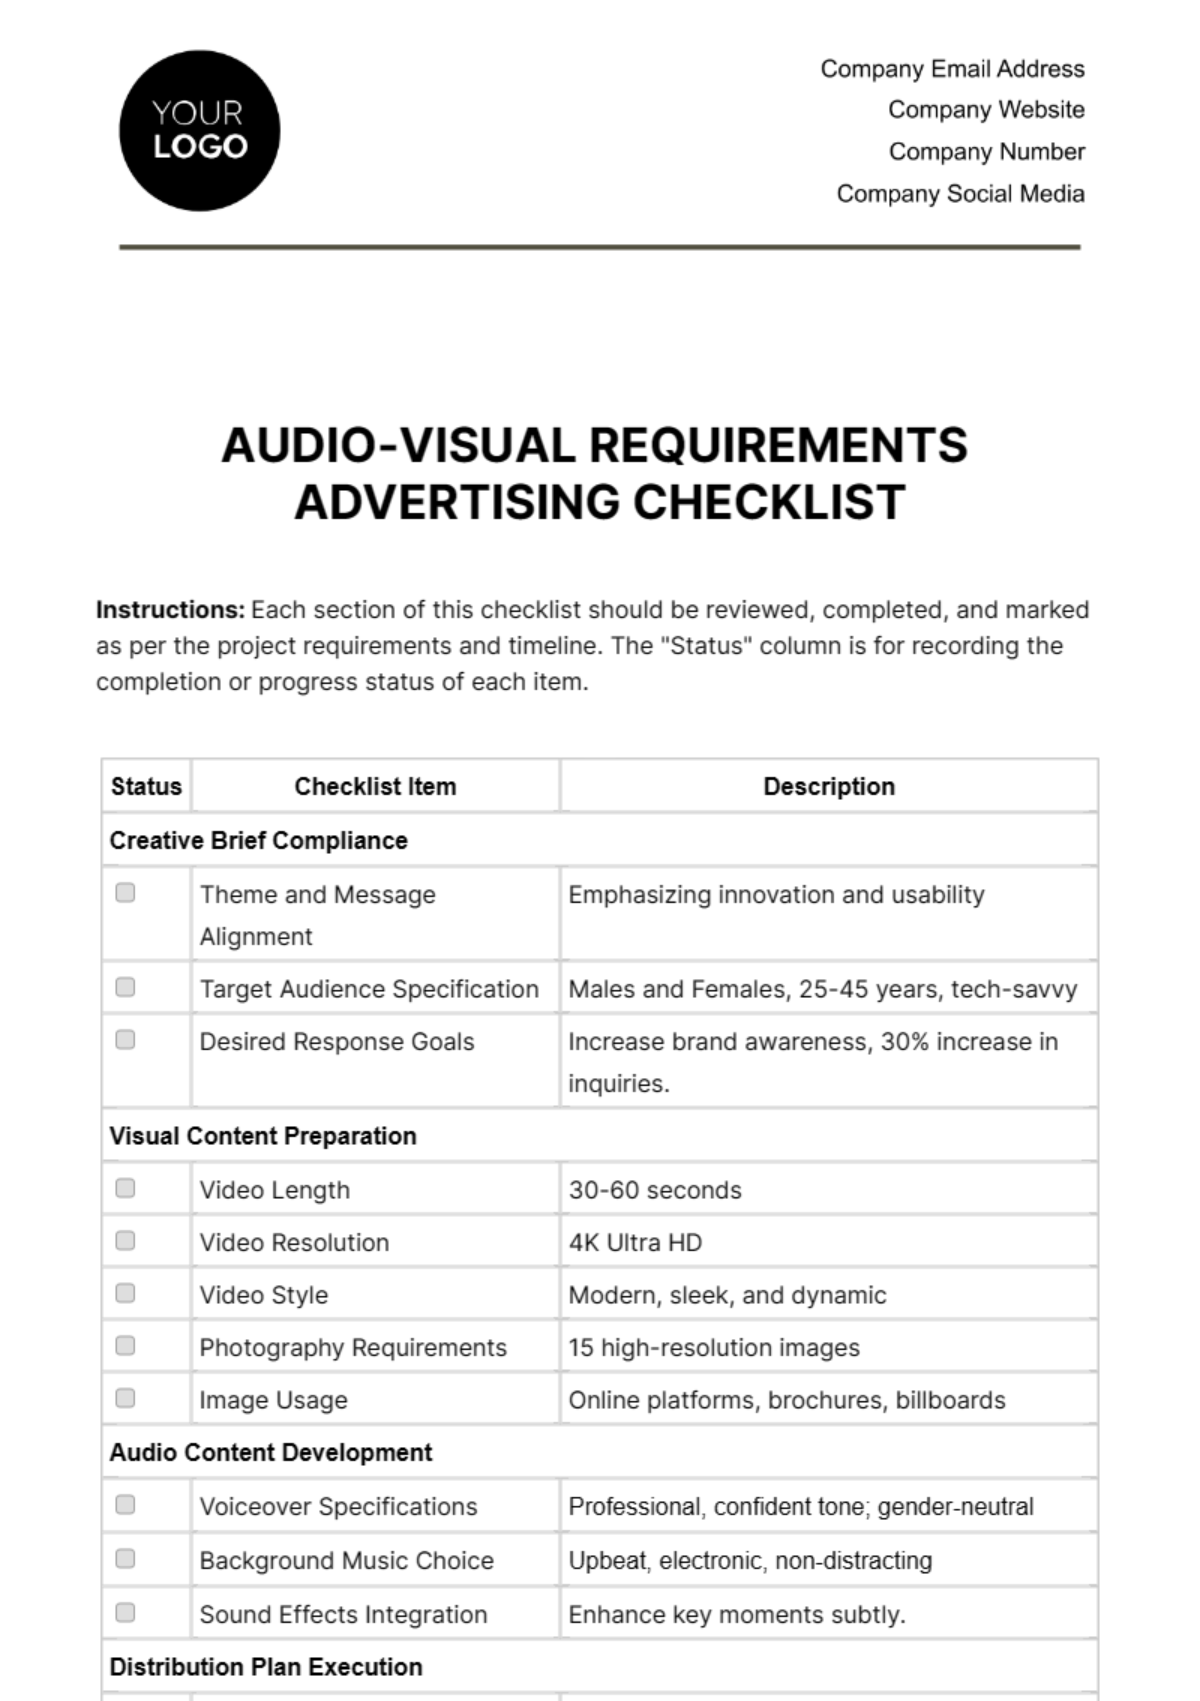 Free Audio-Visual Requirements Advertising Checklist Template